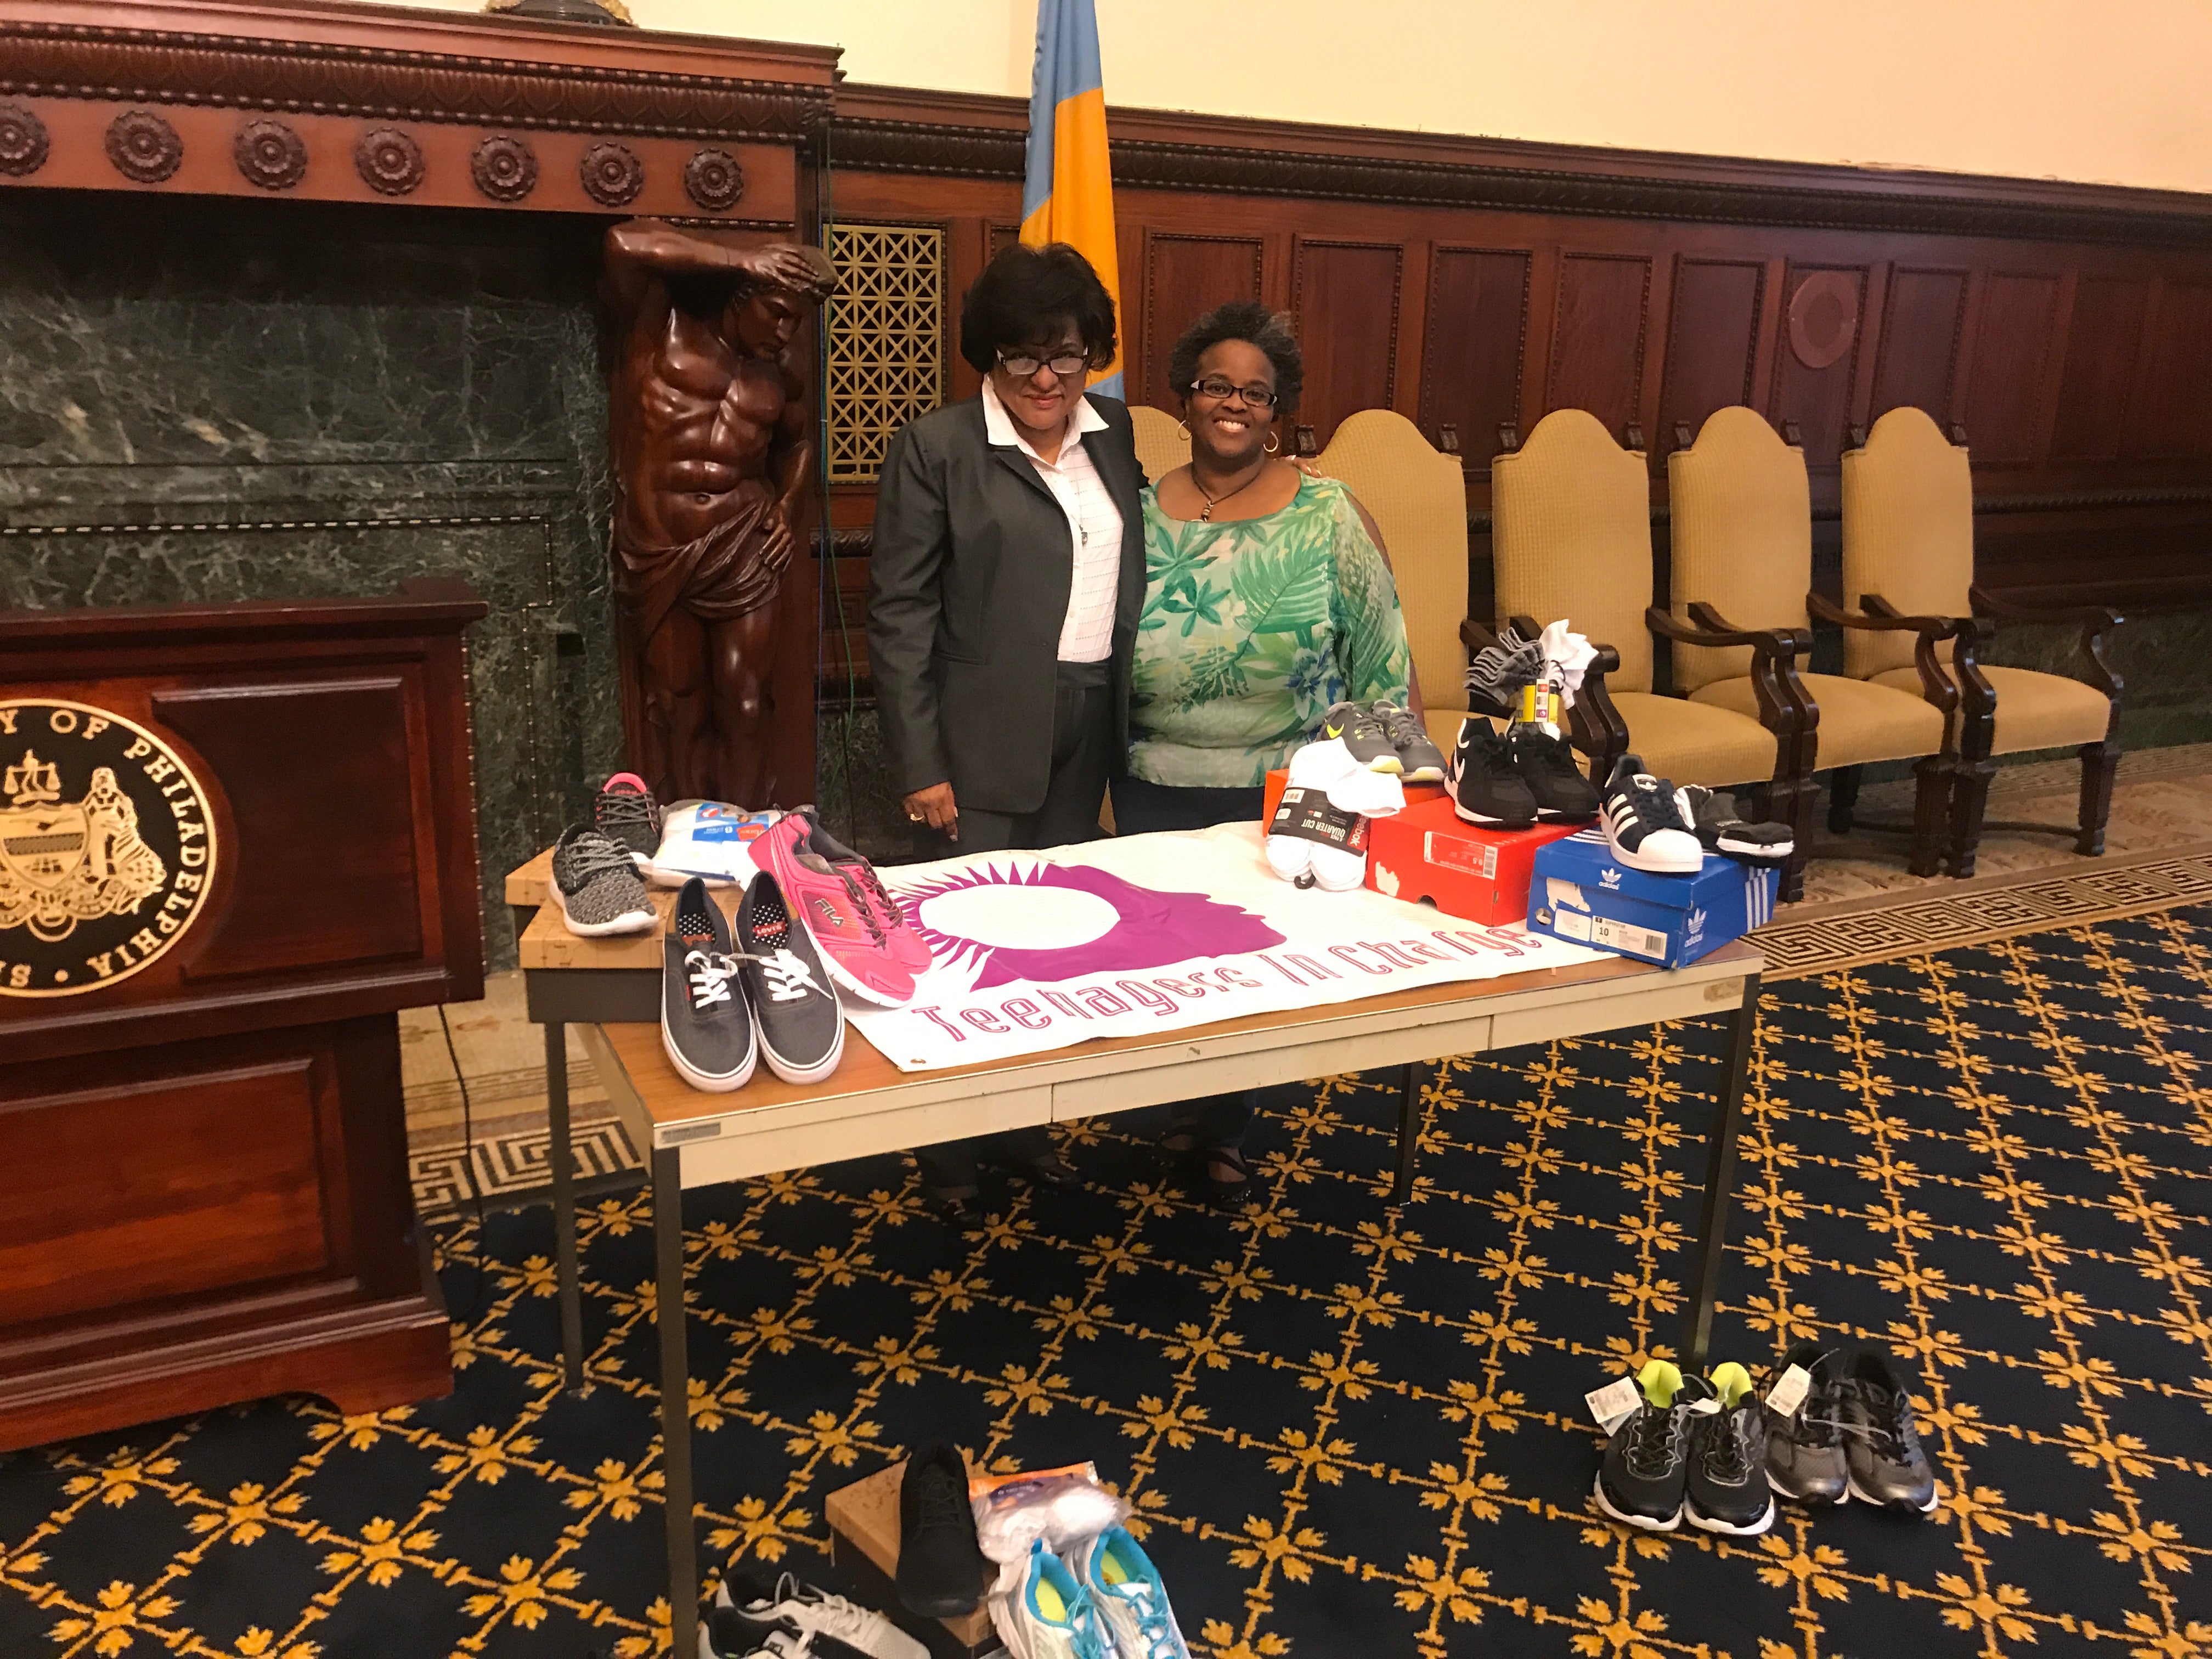  Councilwoman Jannie Blackwell and Judith McDaniel talk about the effort to collect 1,000 pairs of sneakers for homeless youth. (Courtesy Teresa Lundy) 